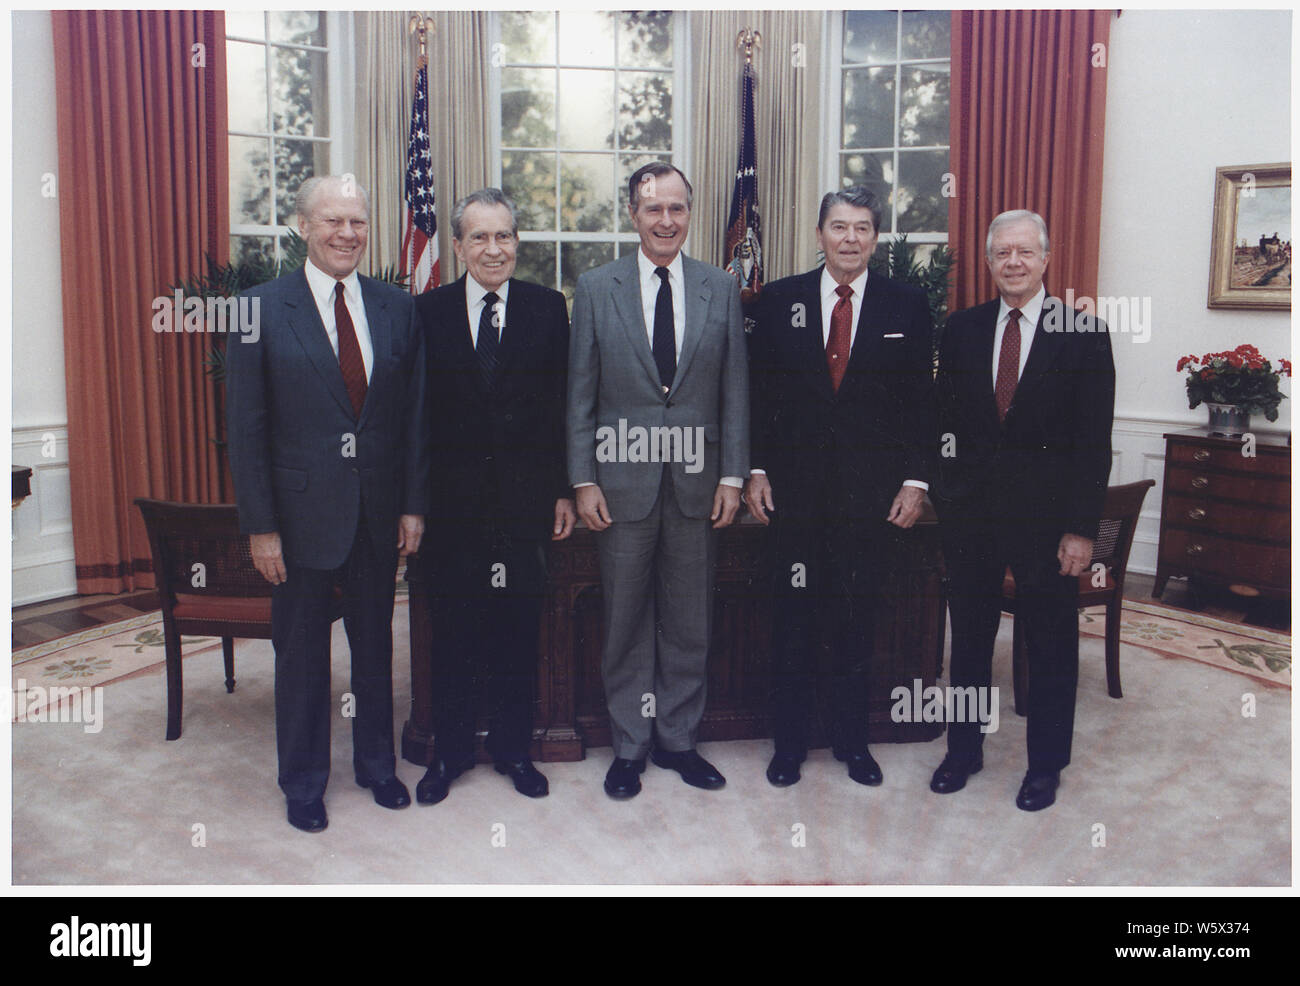 President Bush participates in a group photo with former presidents Gerald Ford, Richard Nixon, Ronald Reagan and Jimmy Carter in the replica of the Oval Office at the Dedication of the Ronald Reagan Presidential Library in Simi Valley, California Stock Photo